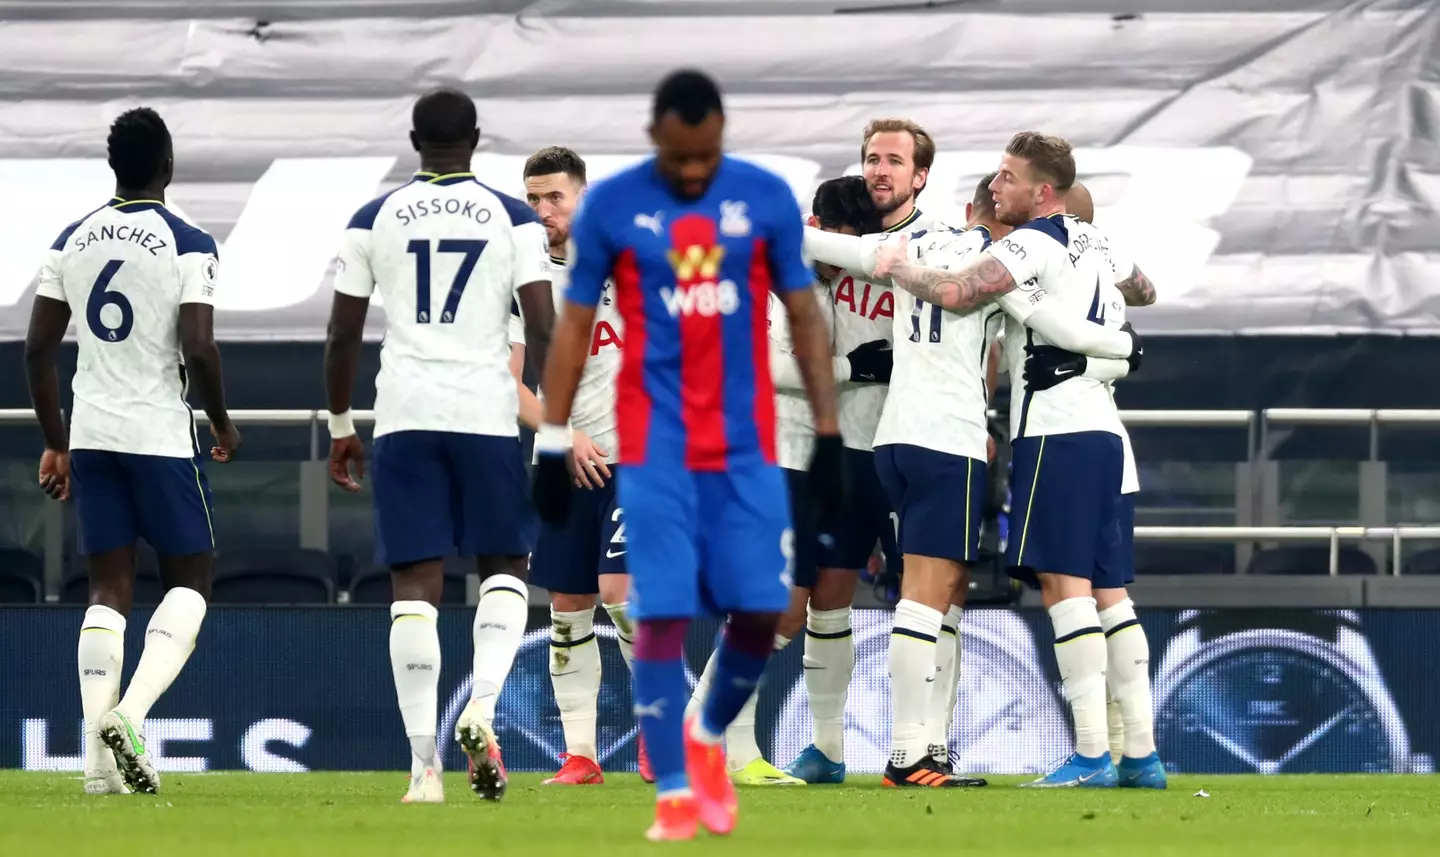 Crystal Palace have failed to topple Tottenham Hotspur in each of the last 12 Premier League encounters